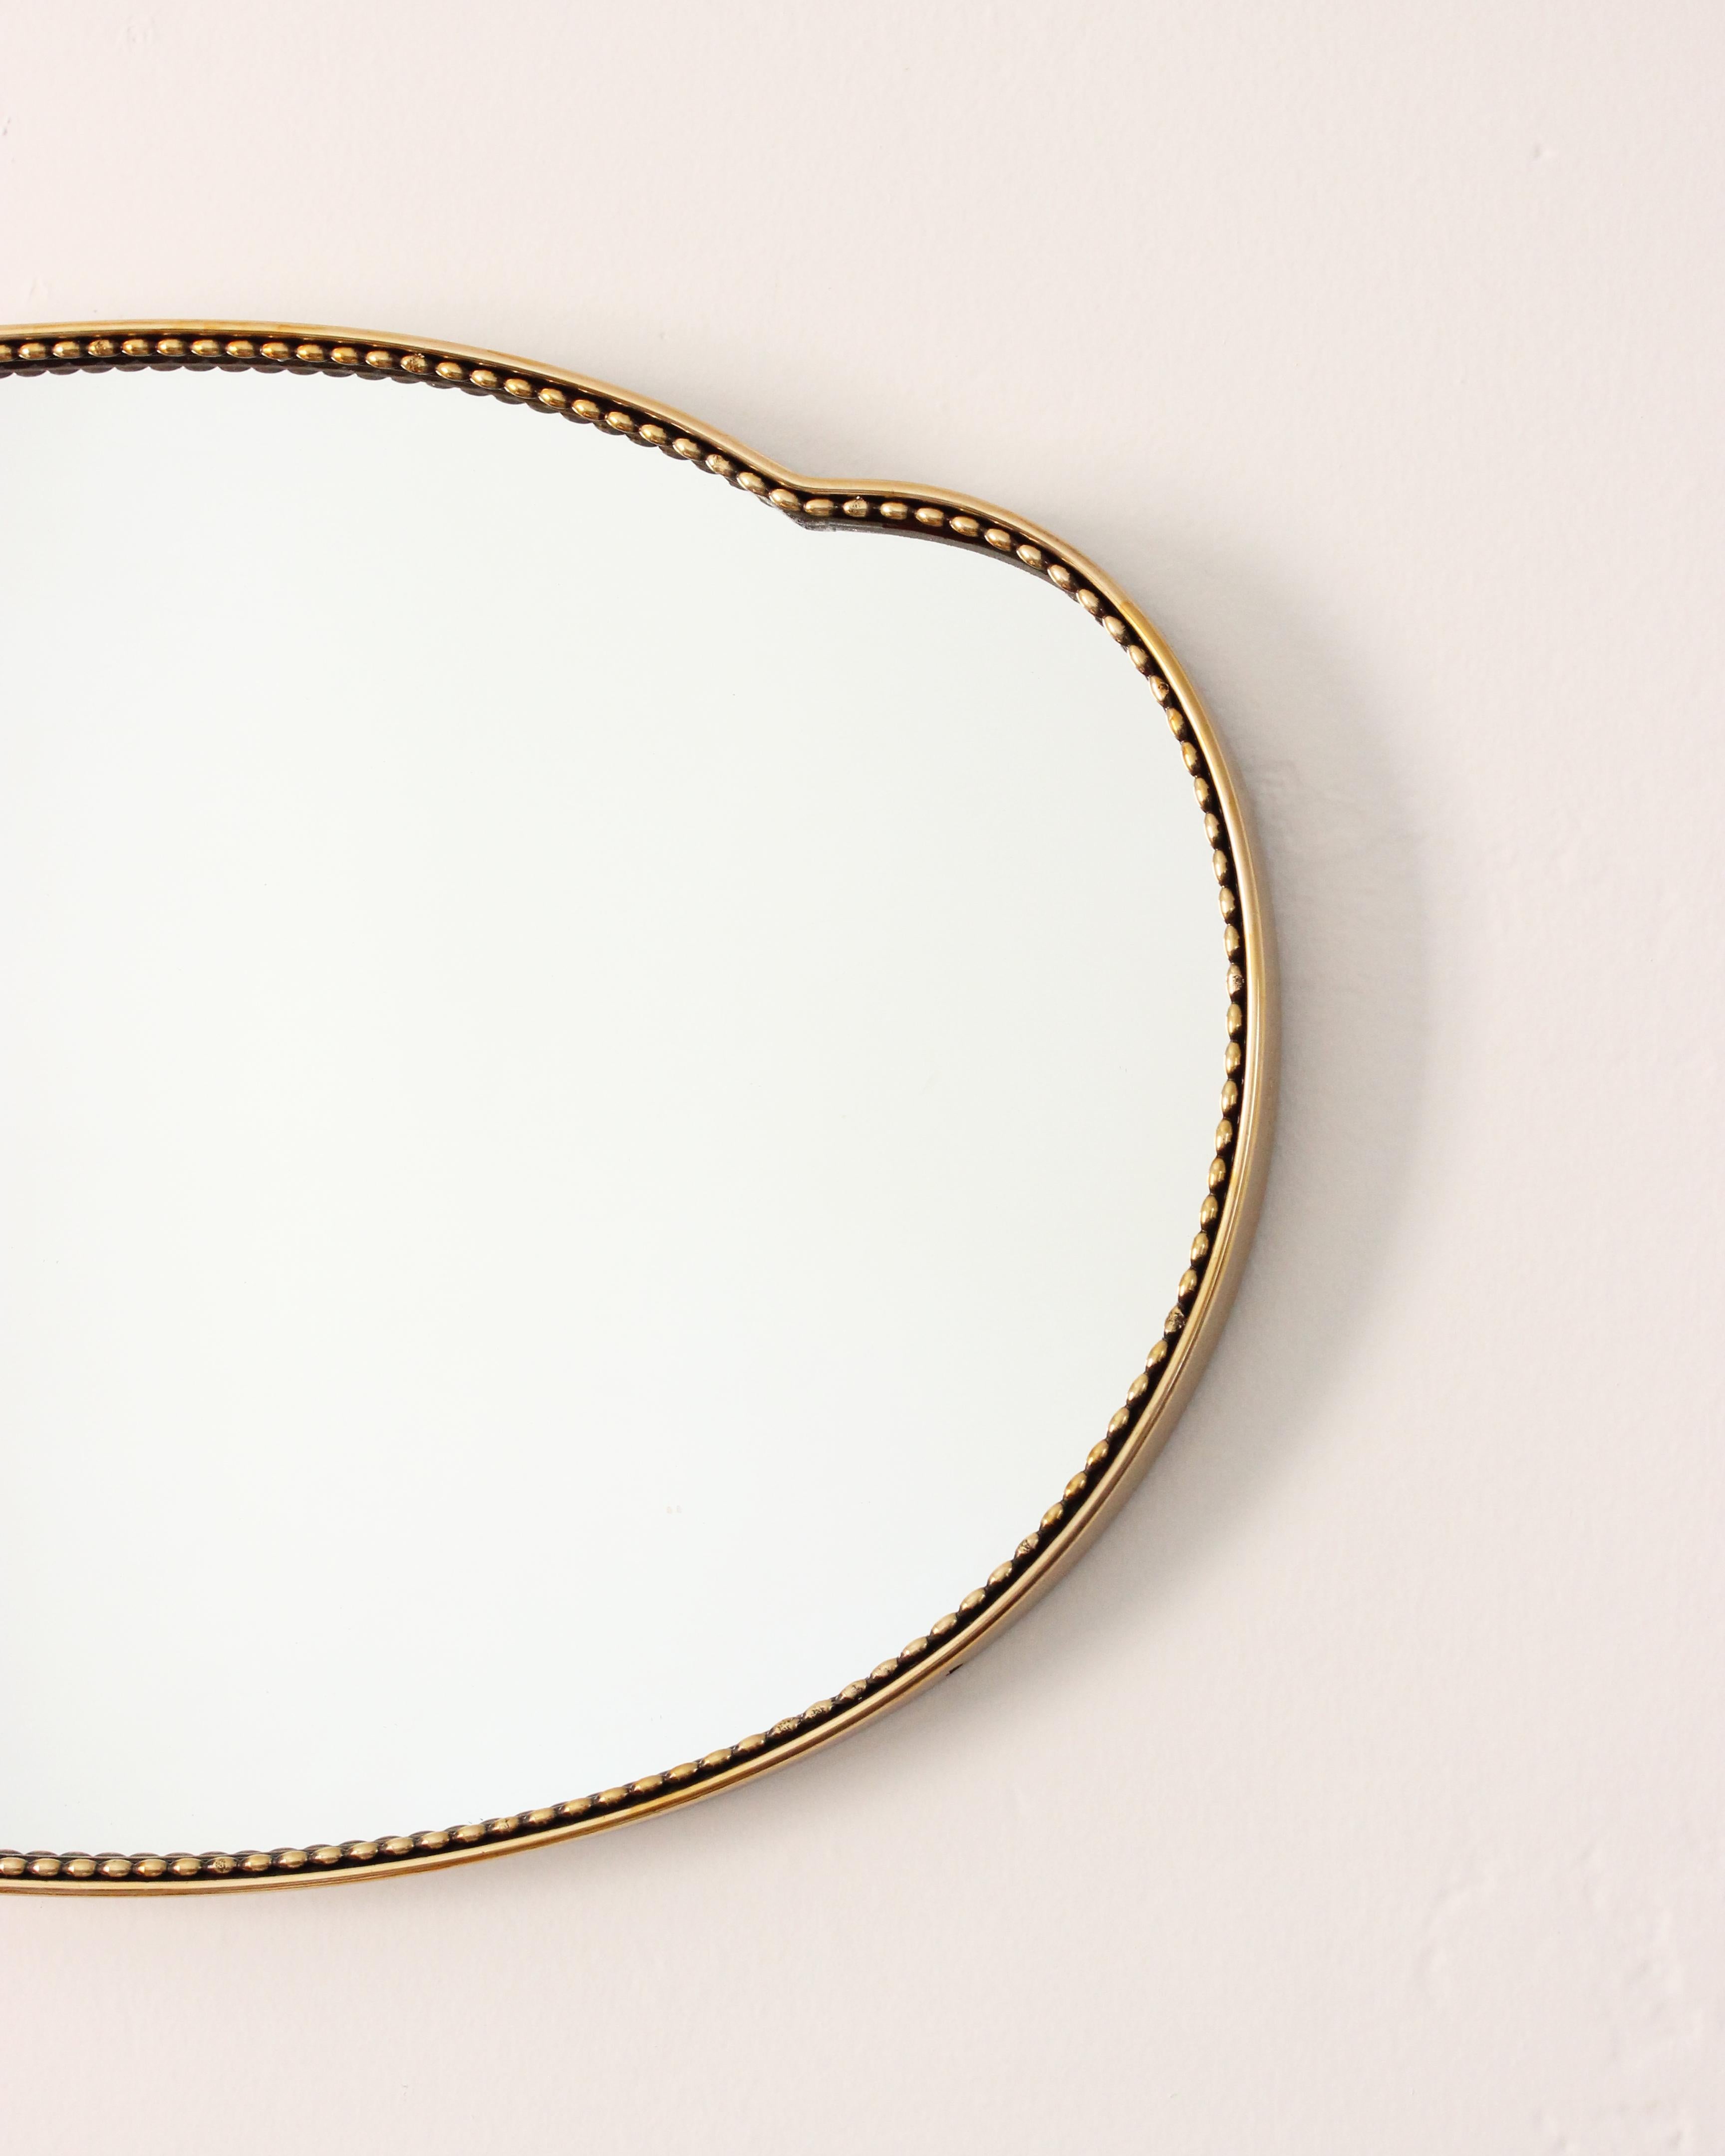 Vintage Italian Brass Mirror, Italy, 1950's Organic Wall Mirror In Good Condition For Sale In Los Angeles, CA